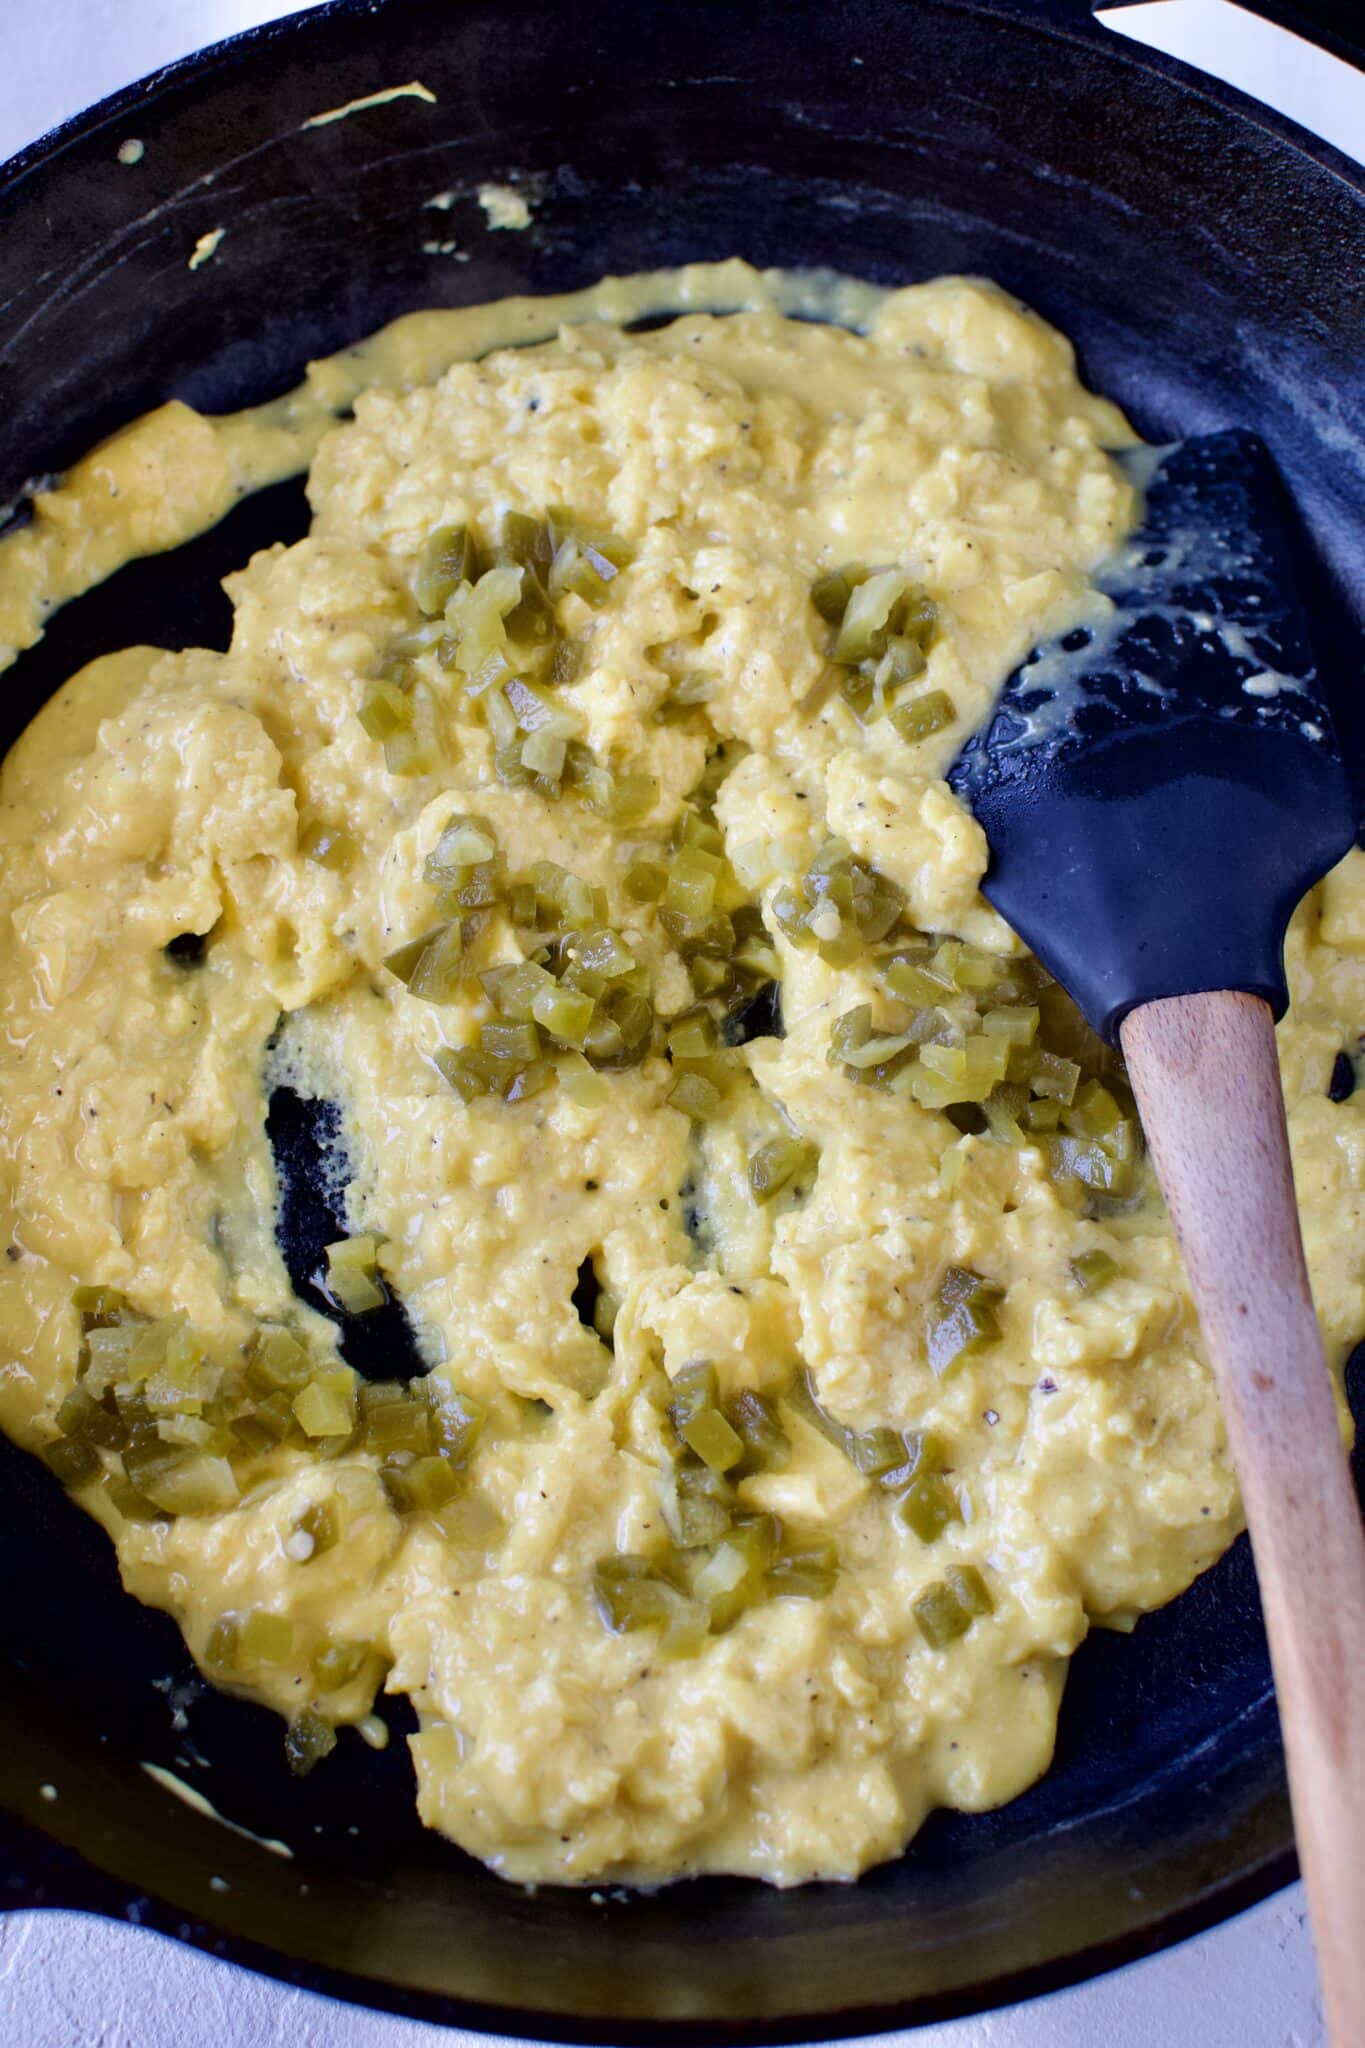 Scrambled eggs in a pan diced, pickle jalapeno being stirred in.